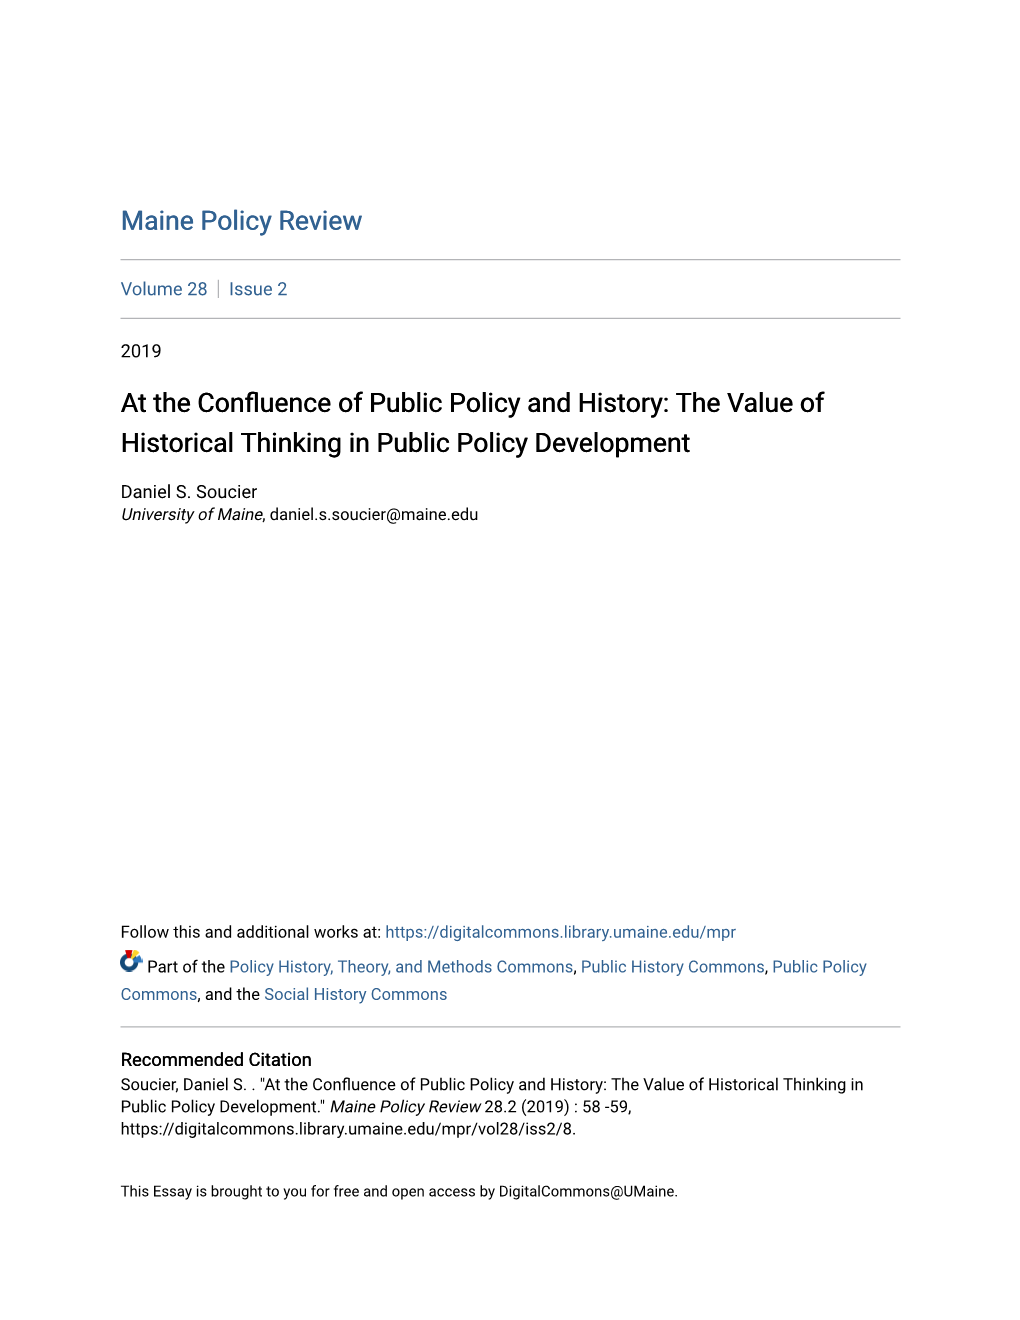 At the Confluence of Public Policy and History: the Value of Historical Thinking in Public Policy Development